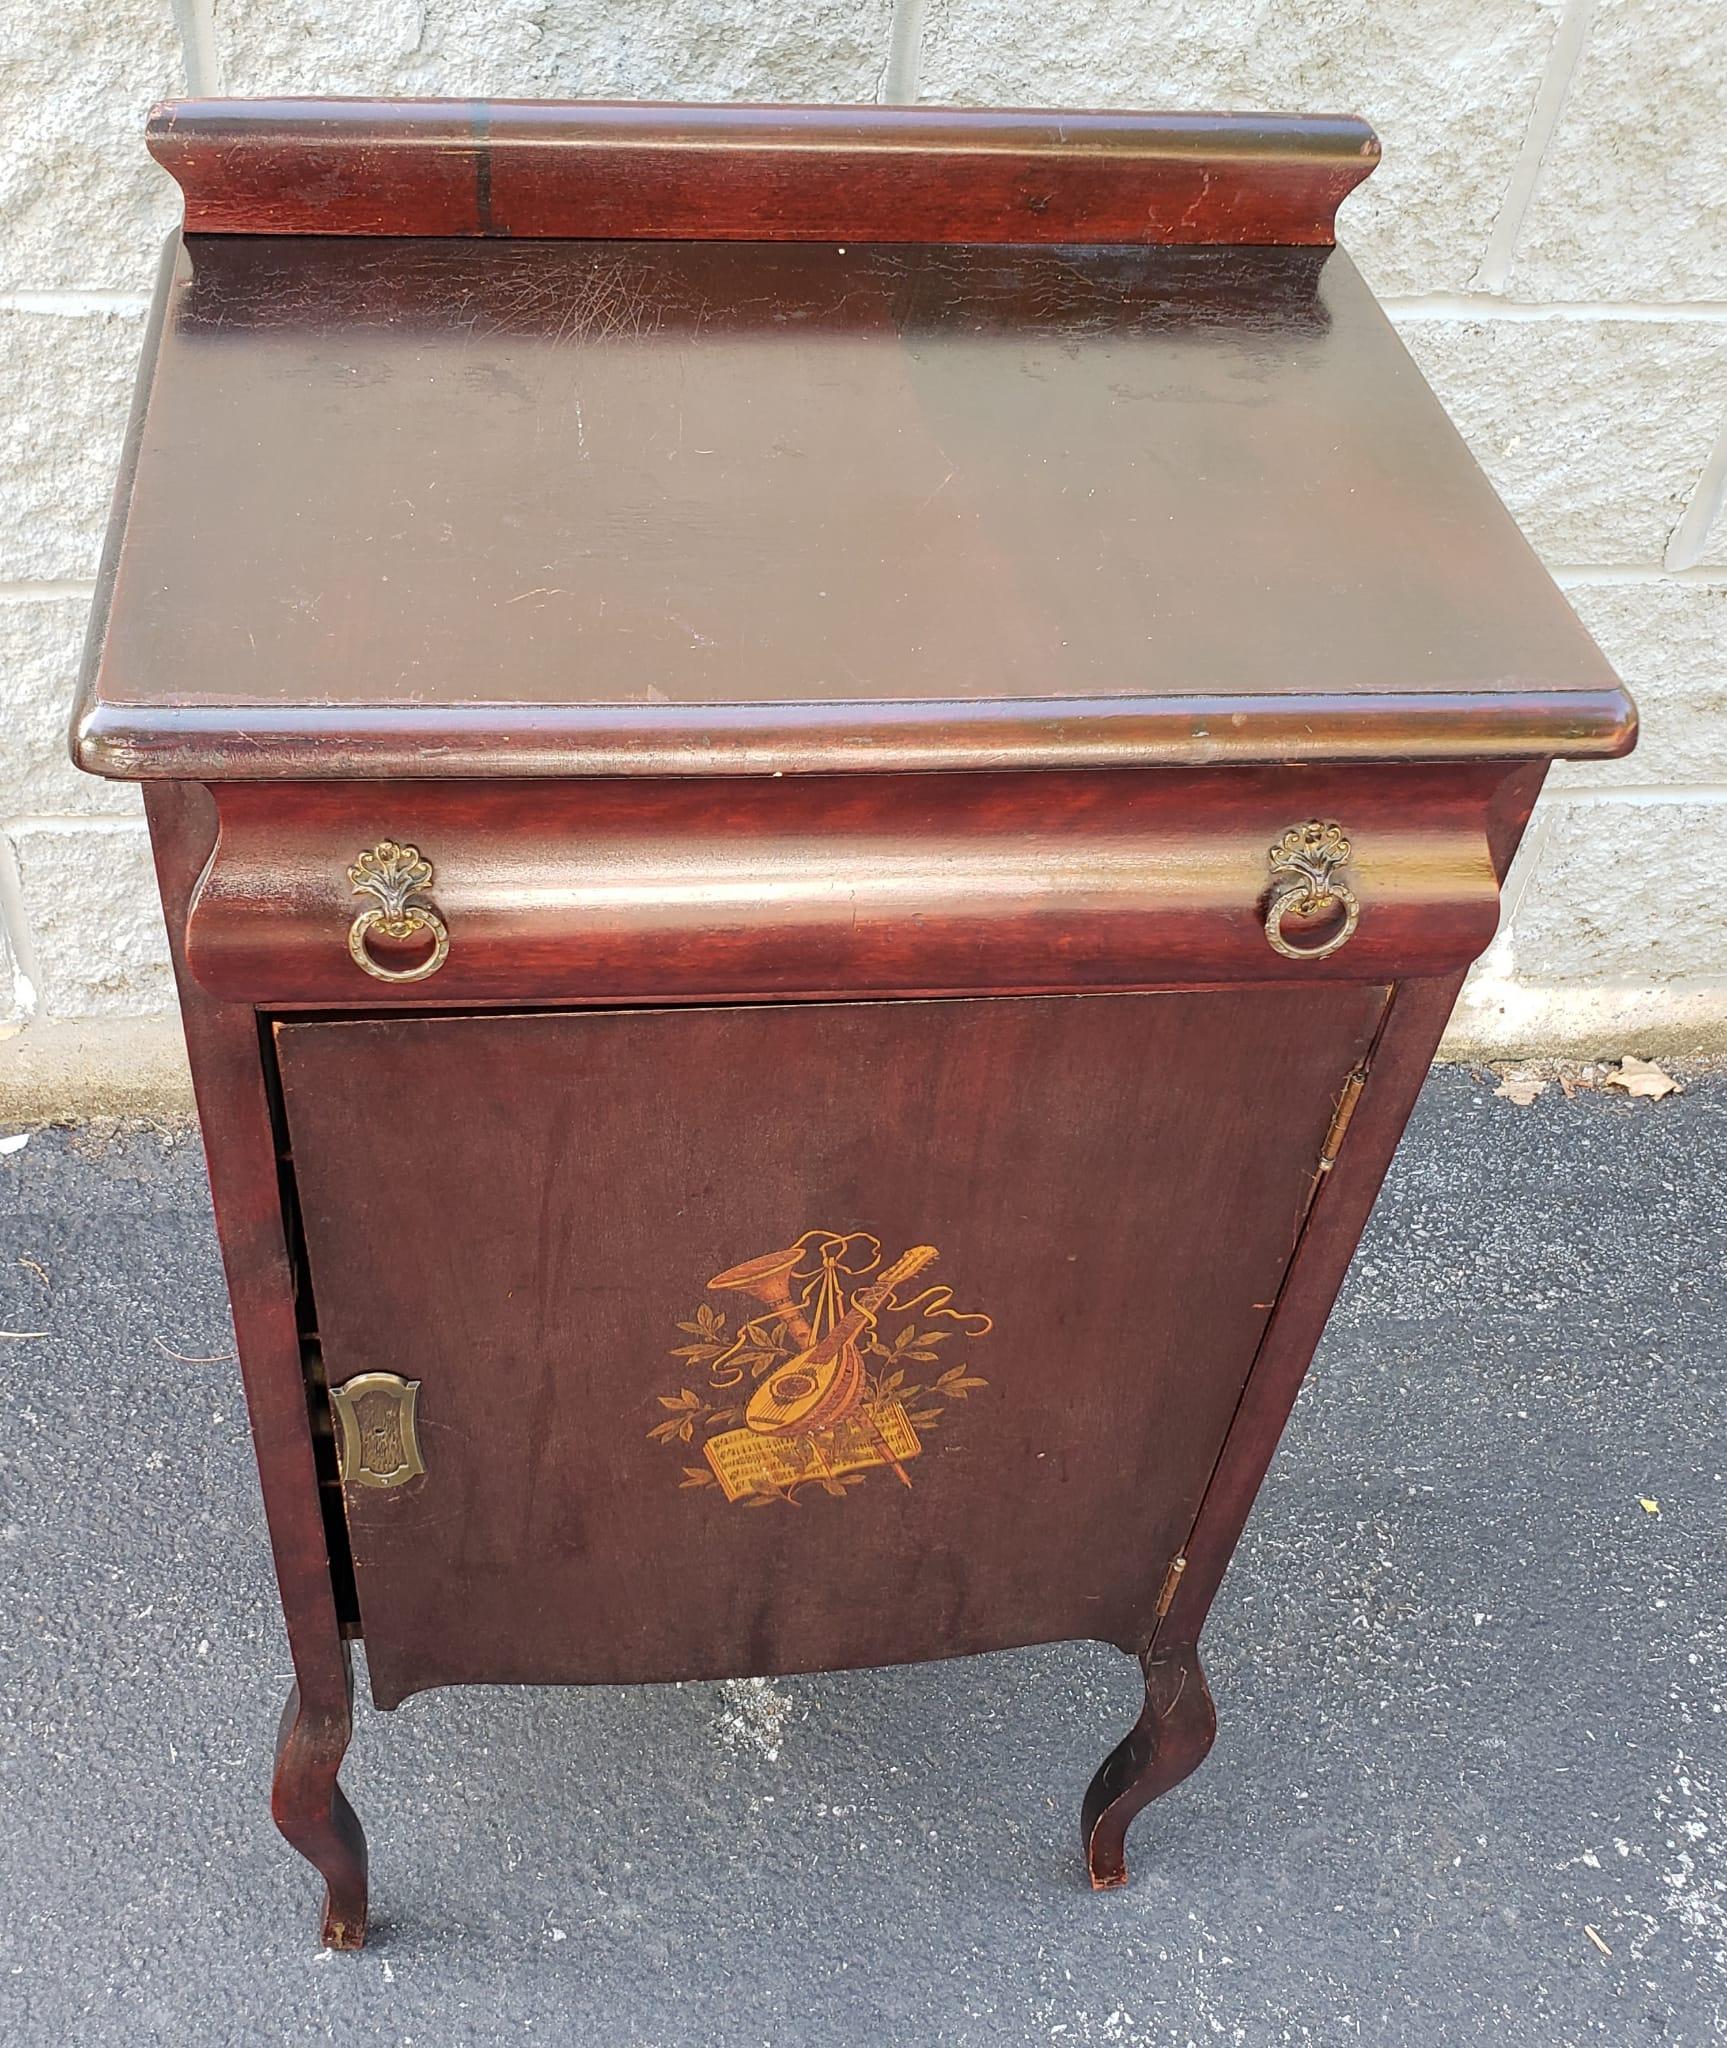 Late 19th Century Victorian Mahogany Sheet Music Cabinet. 
Clean antique condition. Top shelf clearance is 5